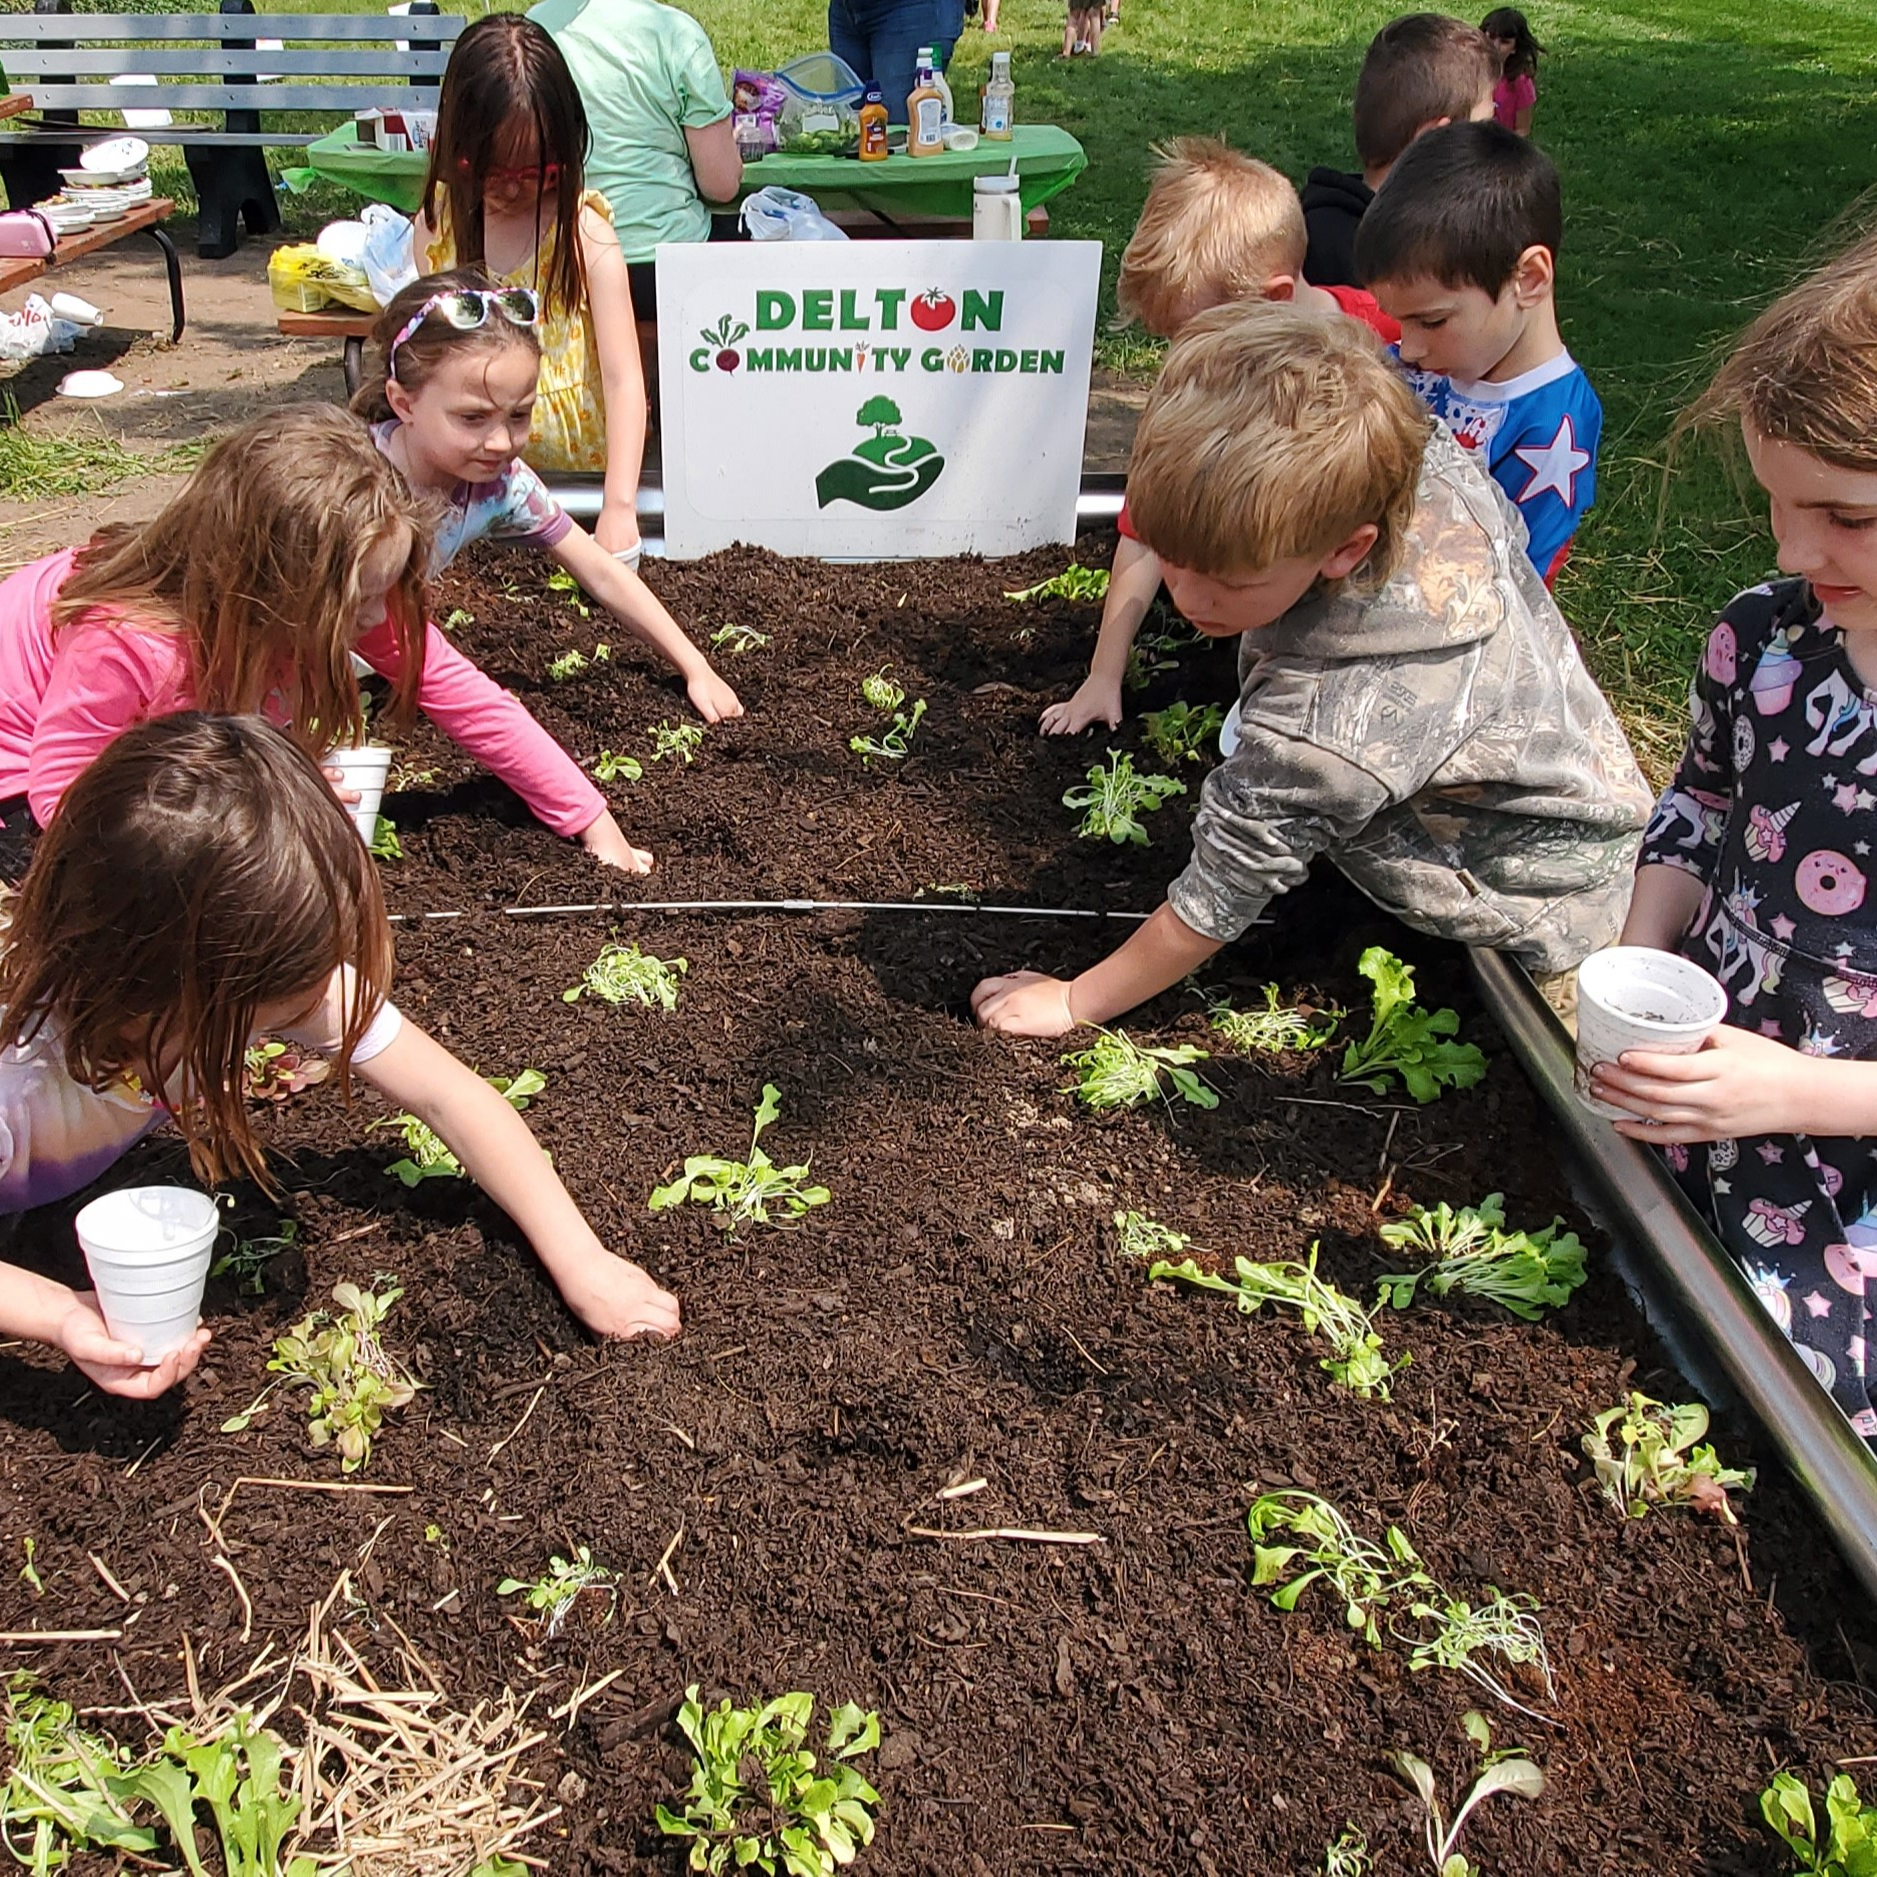 Young students planting in the community garden.